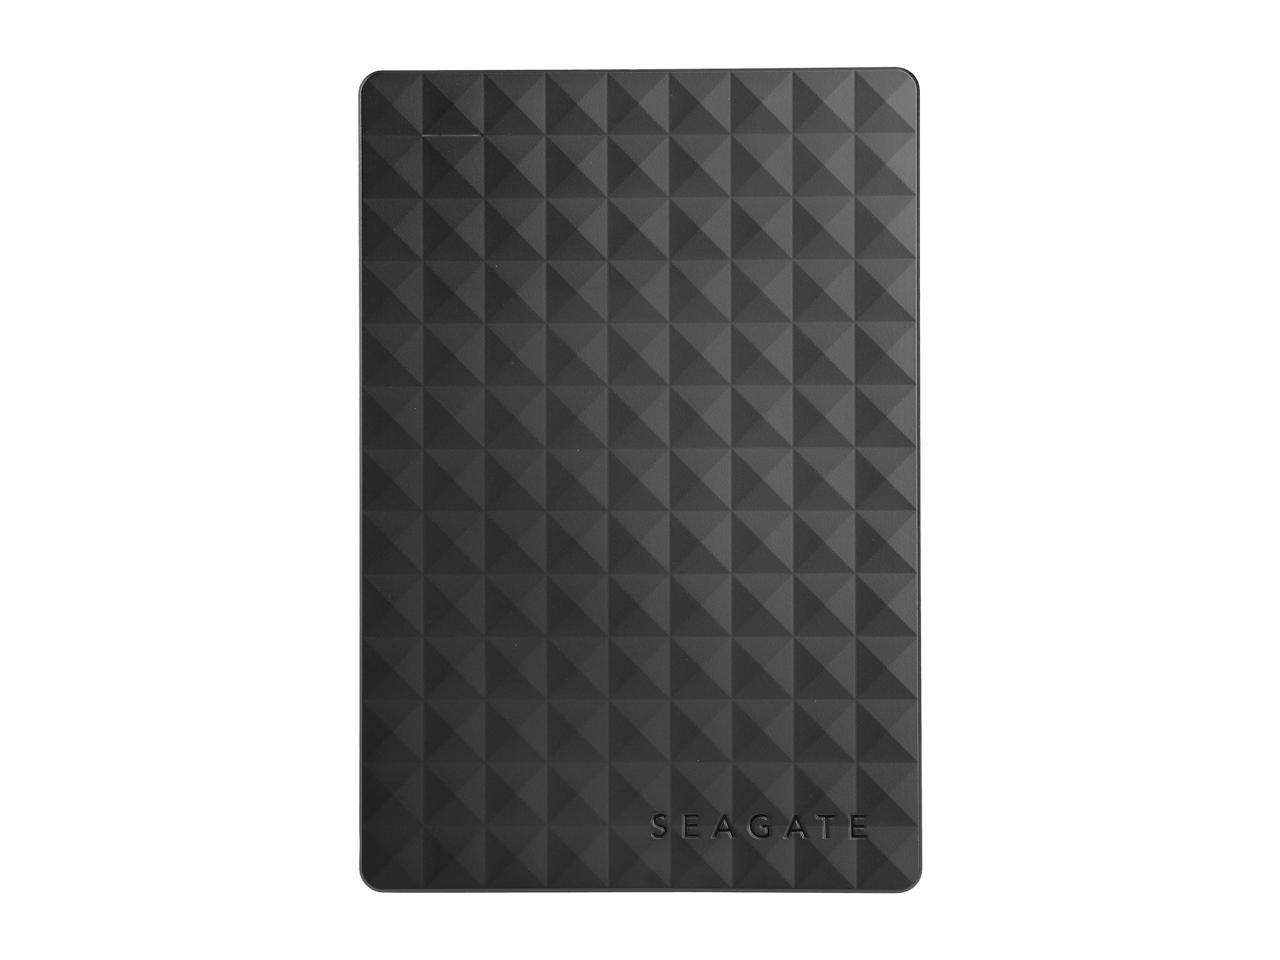 Seagate Portable Hard Drive 500Gb Hdd - External Expansion For Pc Windows Ps4 & Xbox - Usb 2.0 & 3.0 Black (Stea500400)